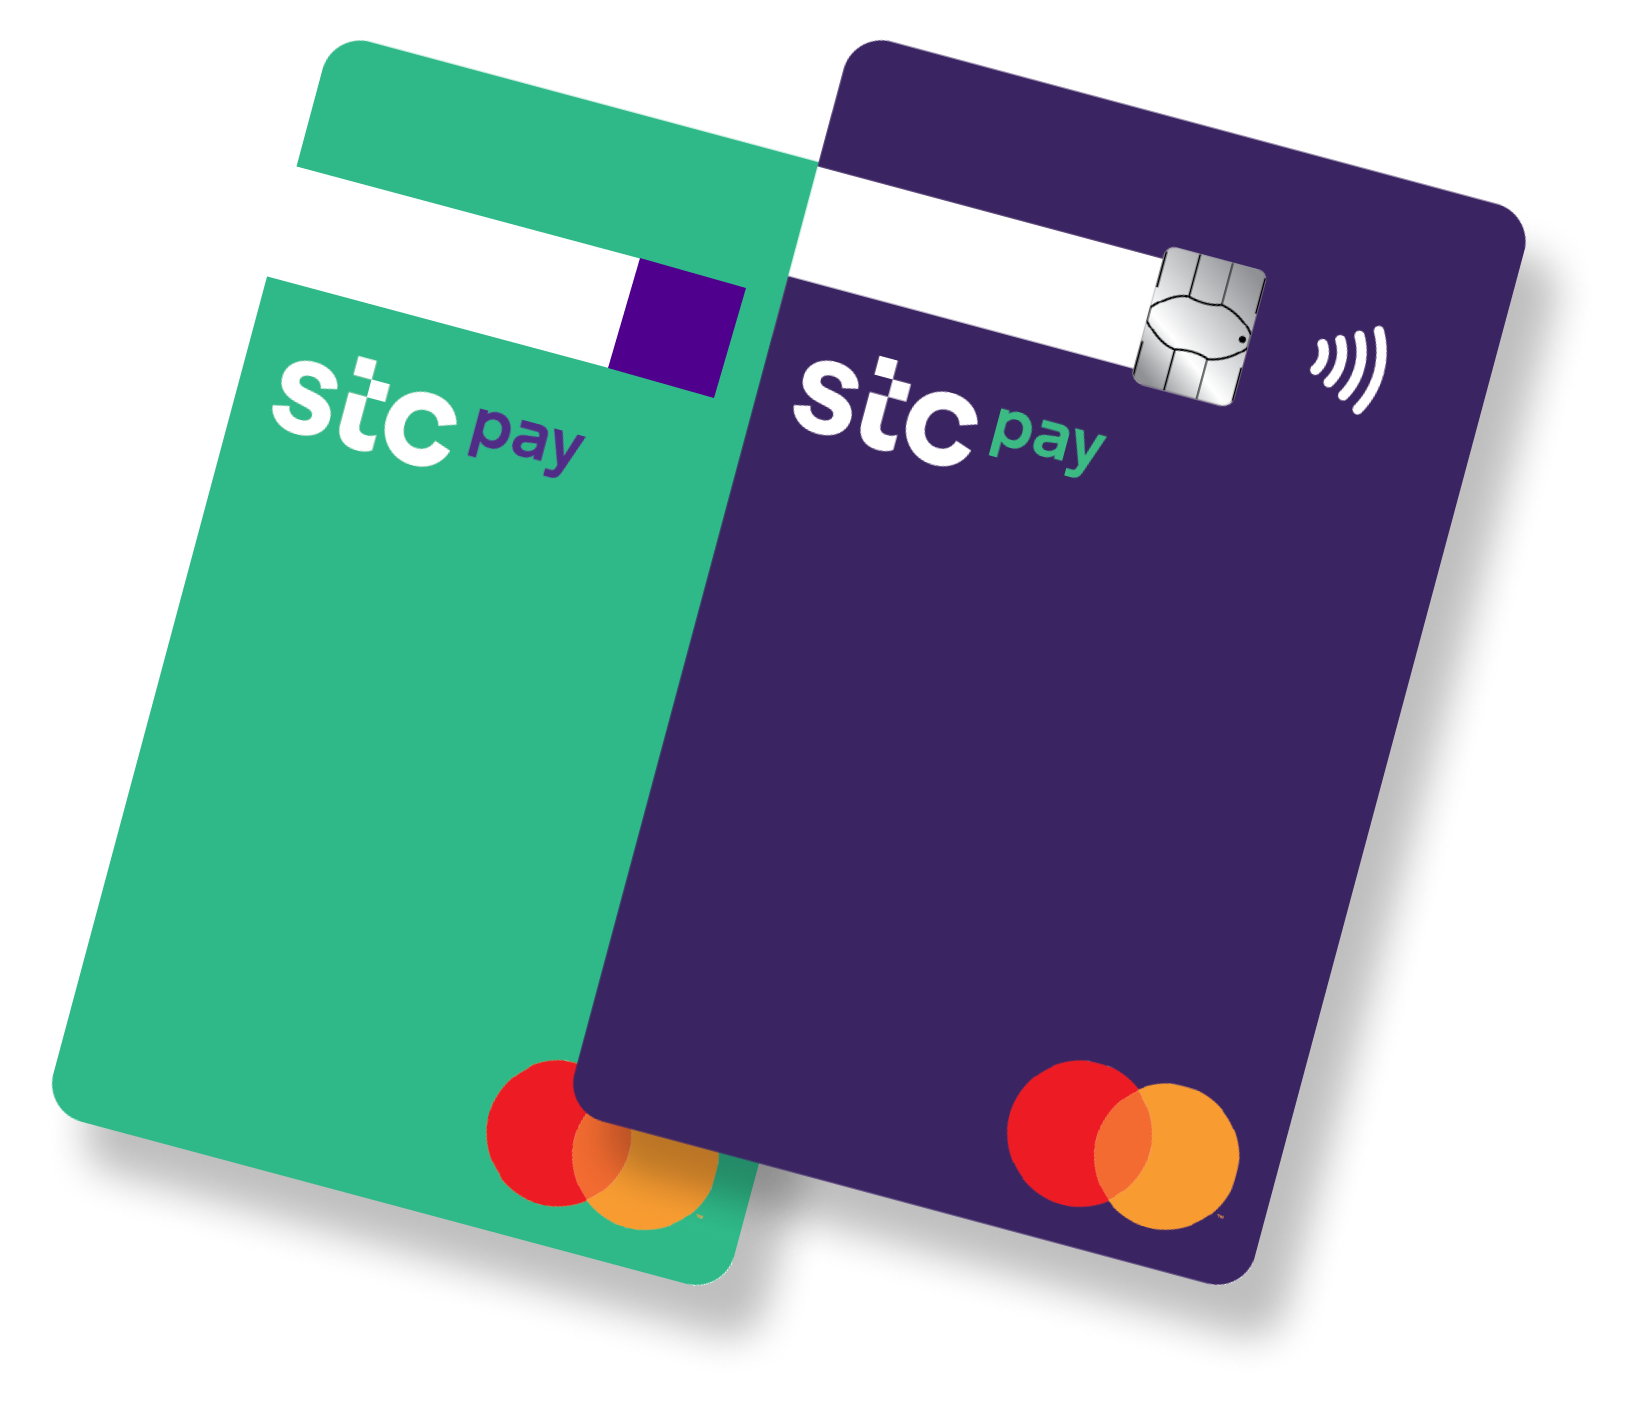 stc pay cards